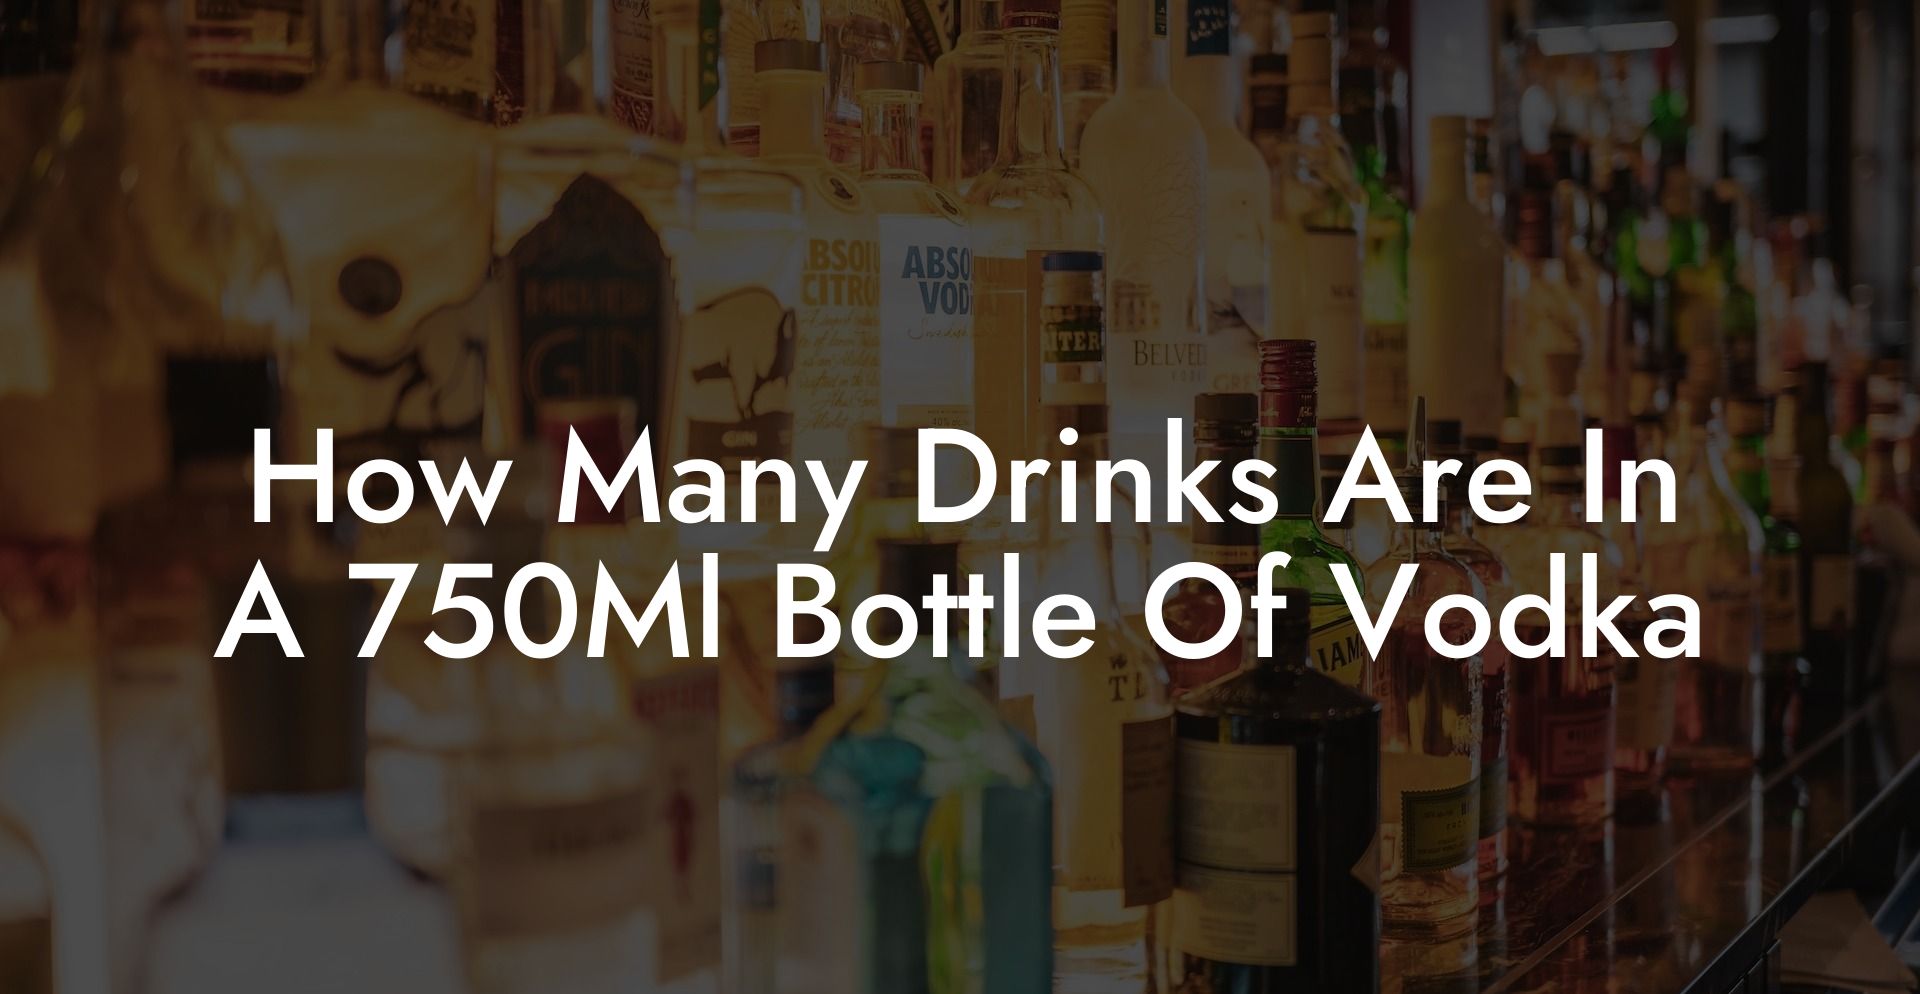 How Many Drinks Are In A 750Ml Bottle Of Vodka